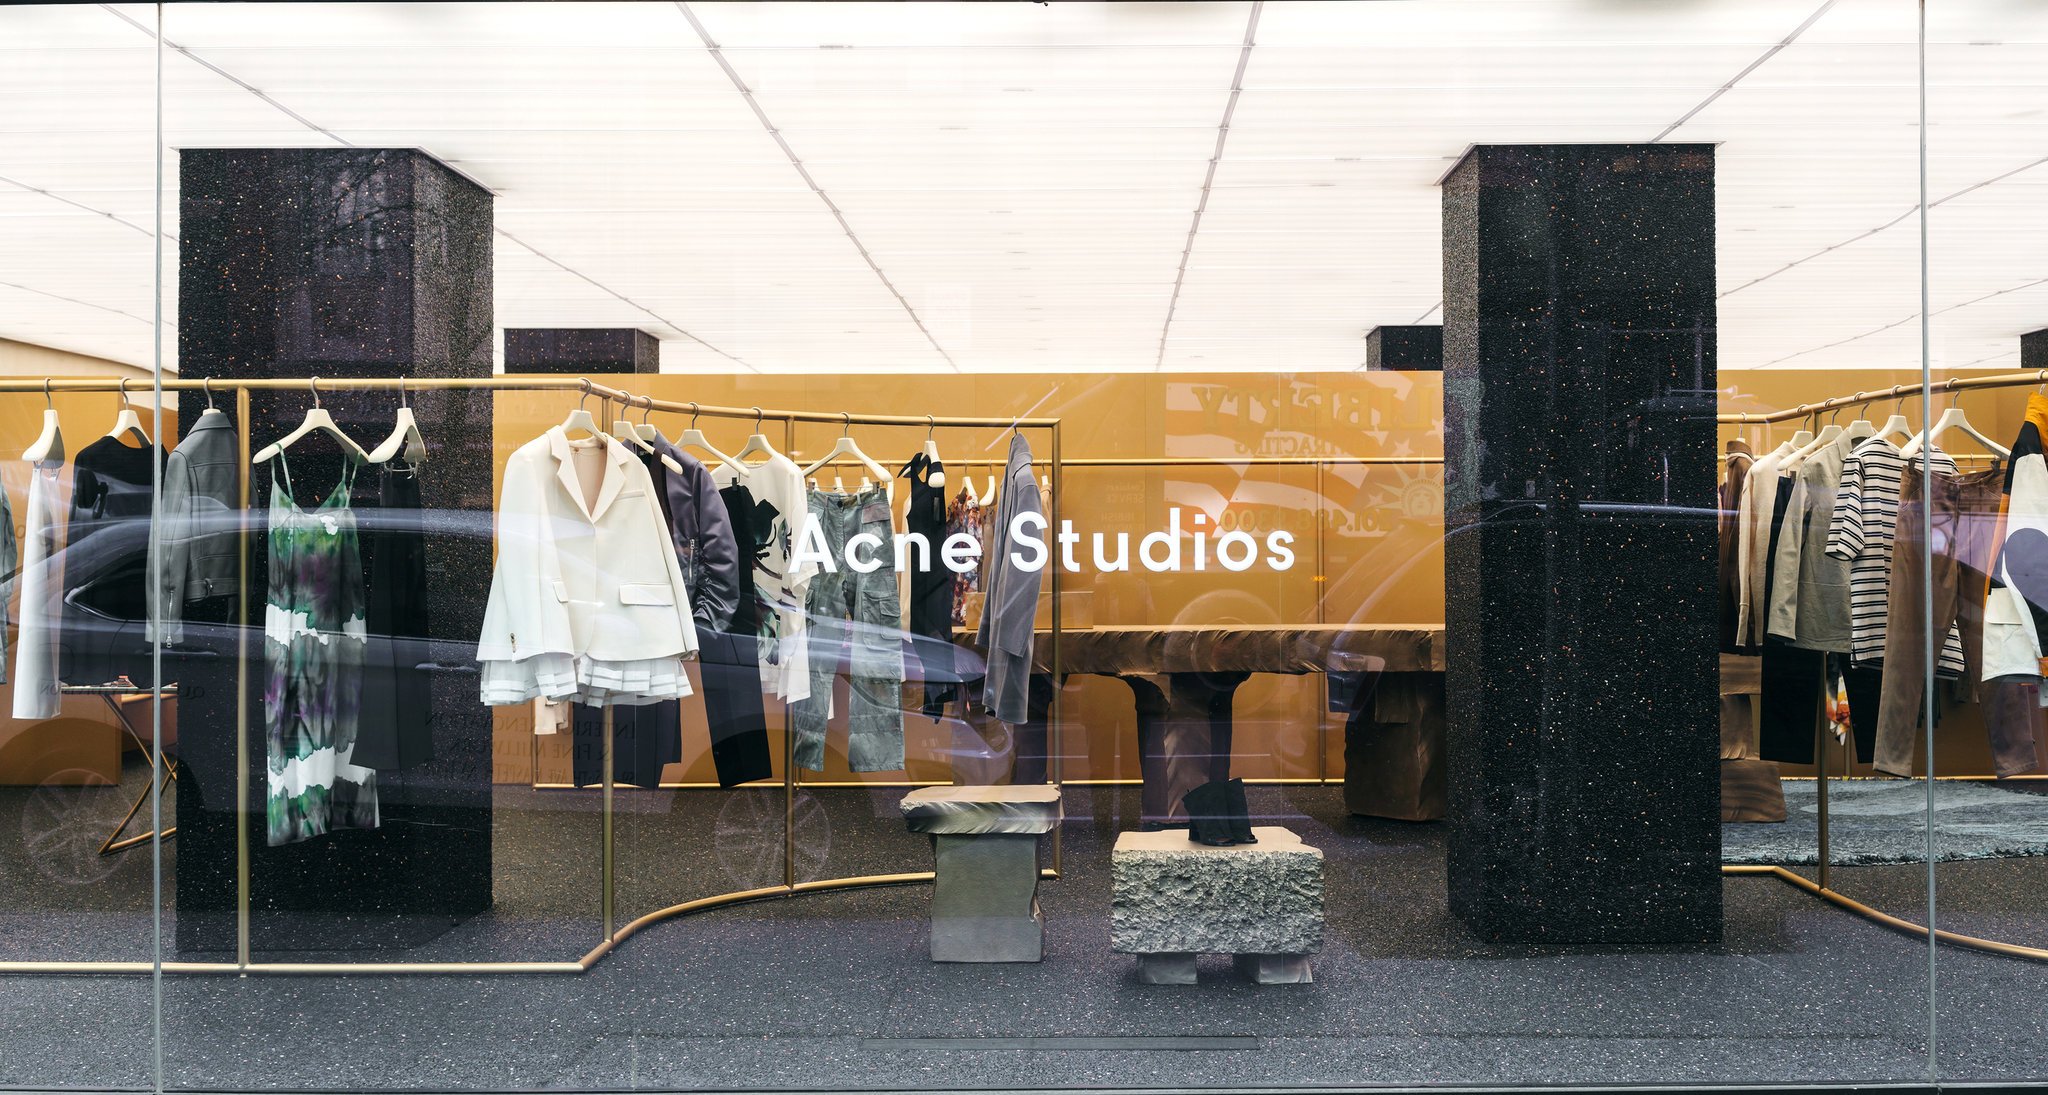 Swedish design giant Acne Studios is reportedly up for sale